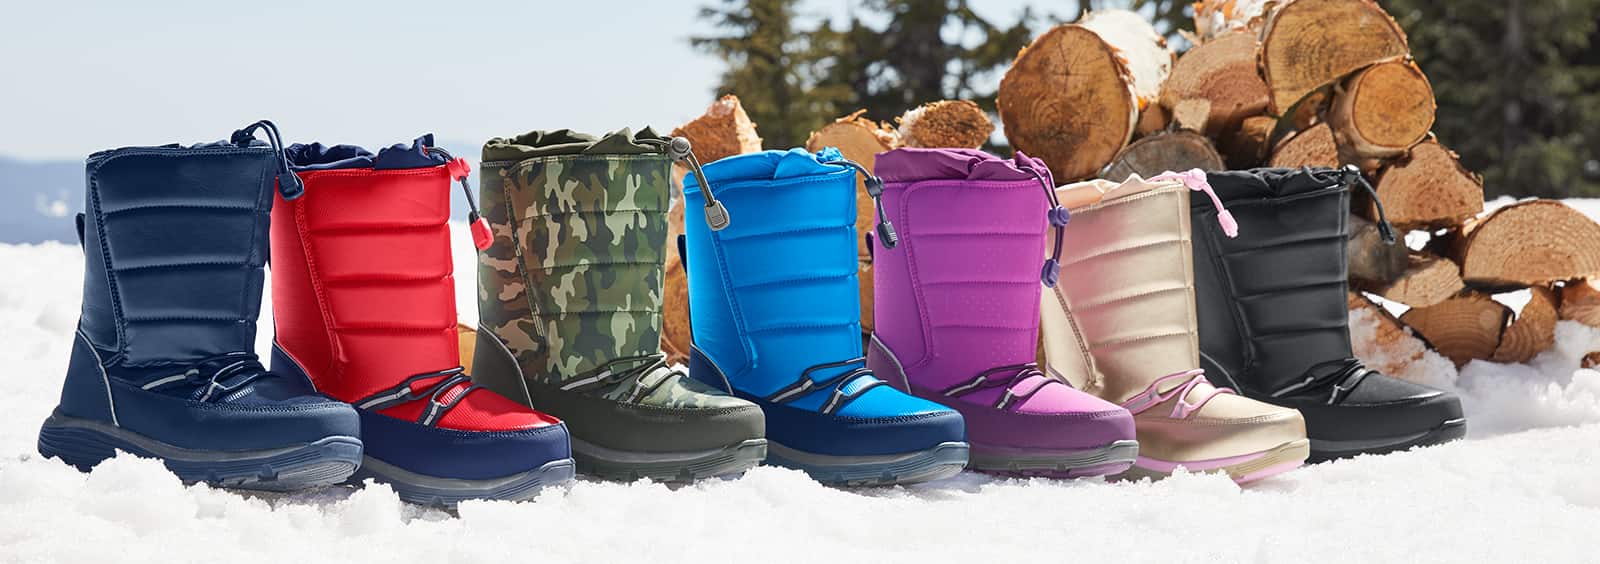 What to Avoid When Buying Kids' Winter and Snow Boots